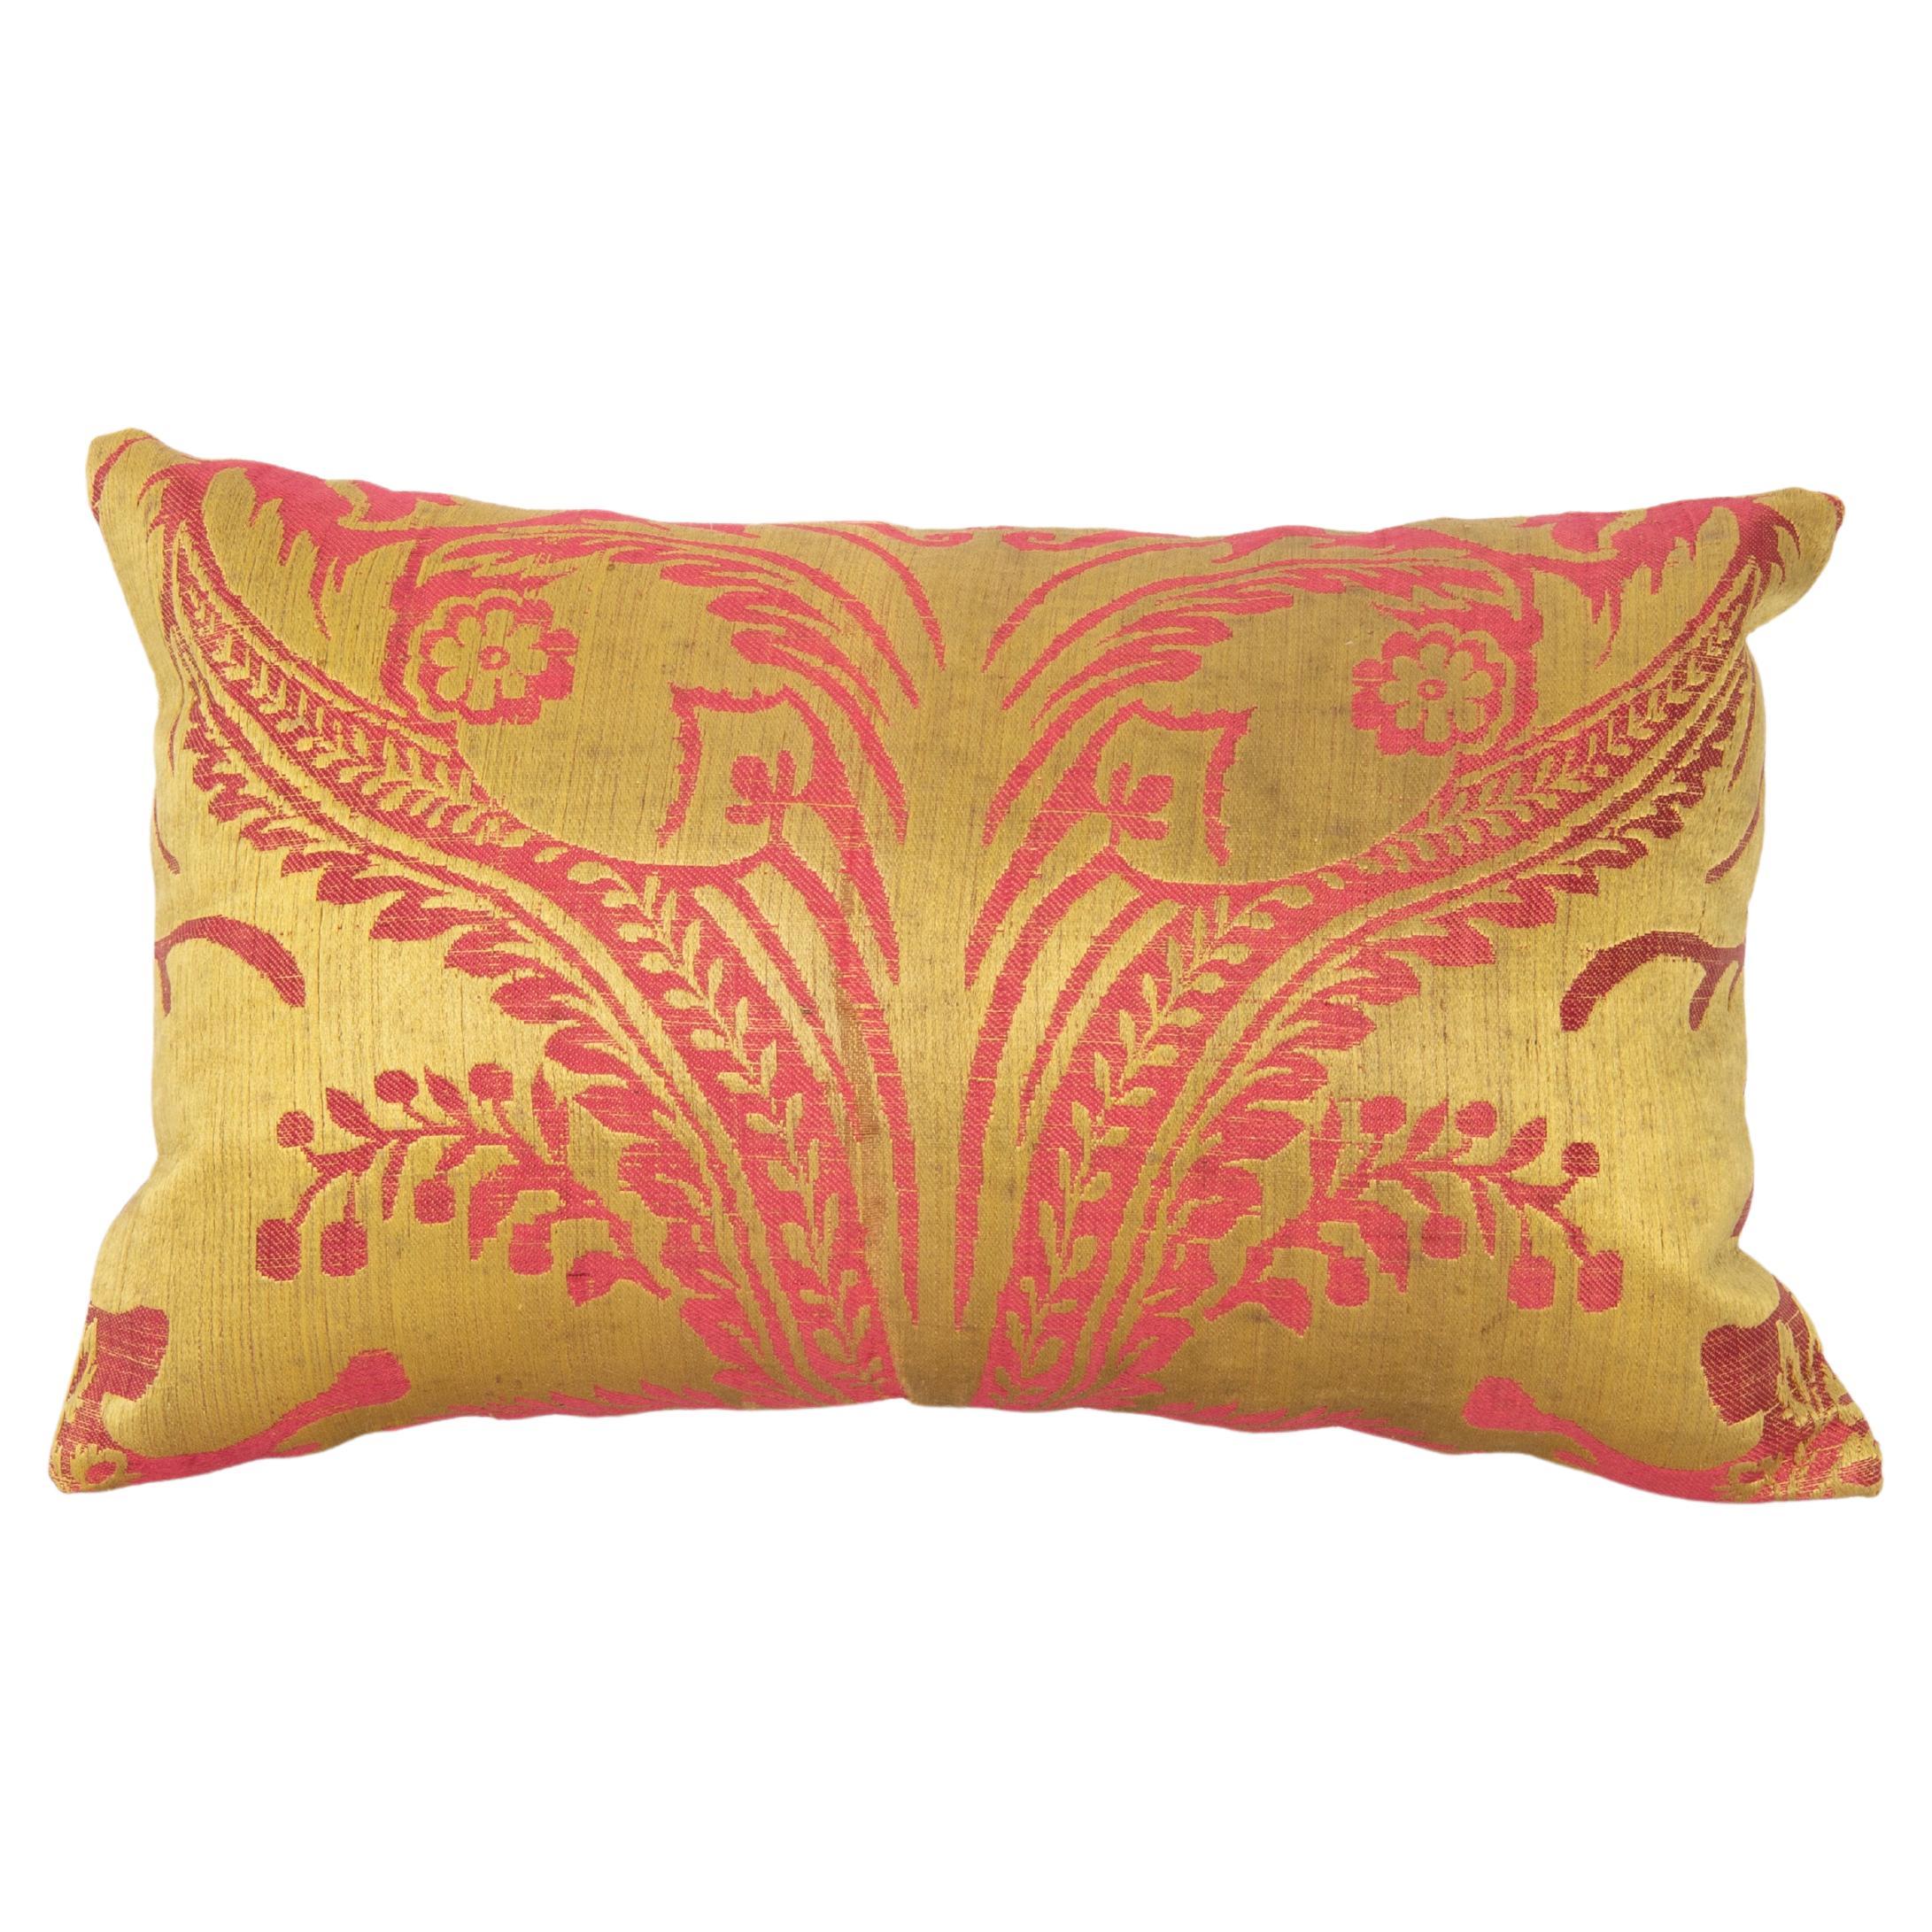 Kidney Pillow Case Made from an Antique Italian Textile For Sale